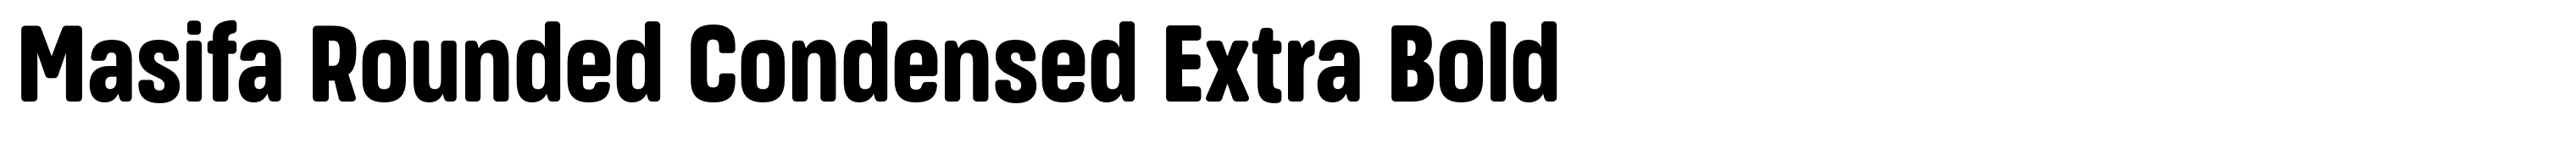 Masifa Rounded Condensed Extra Bold